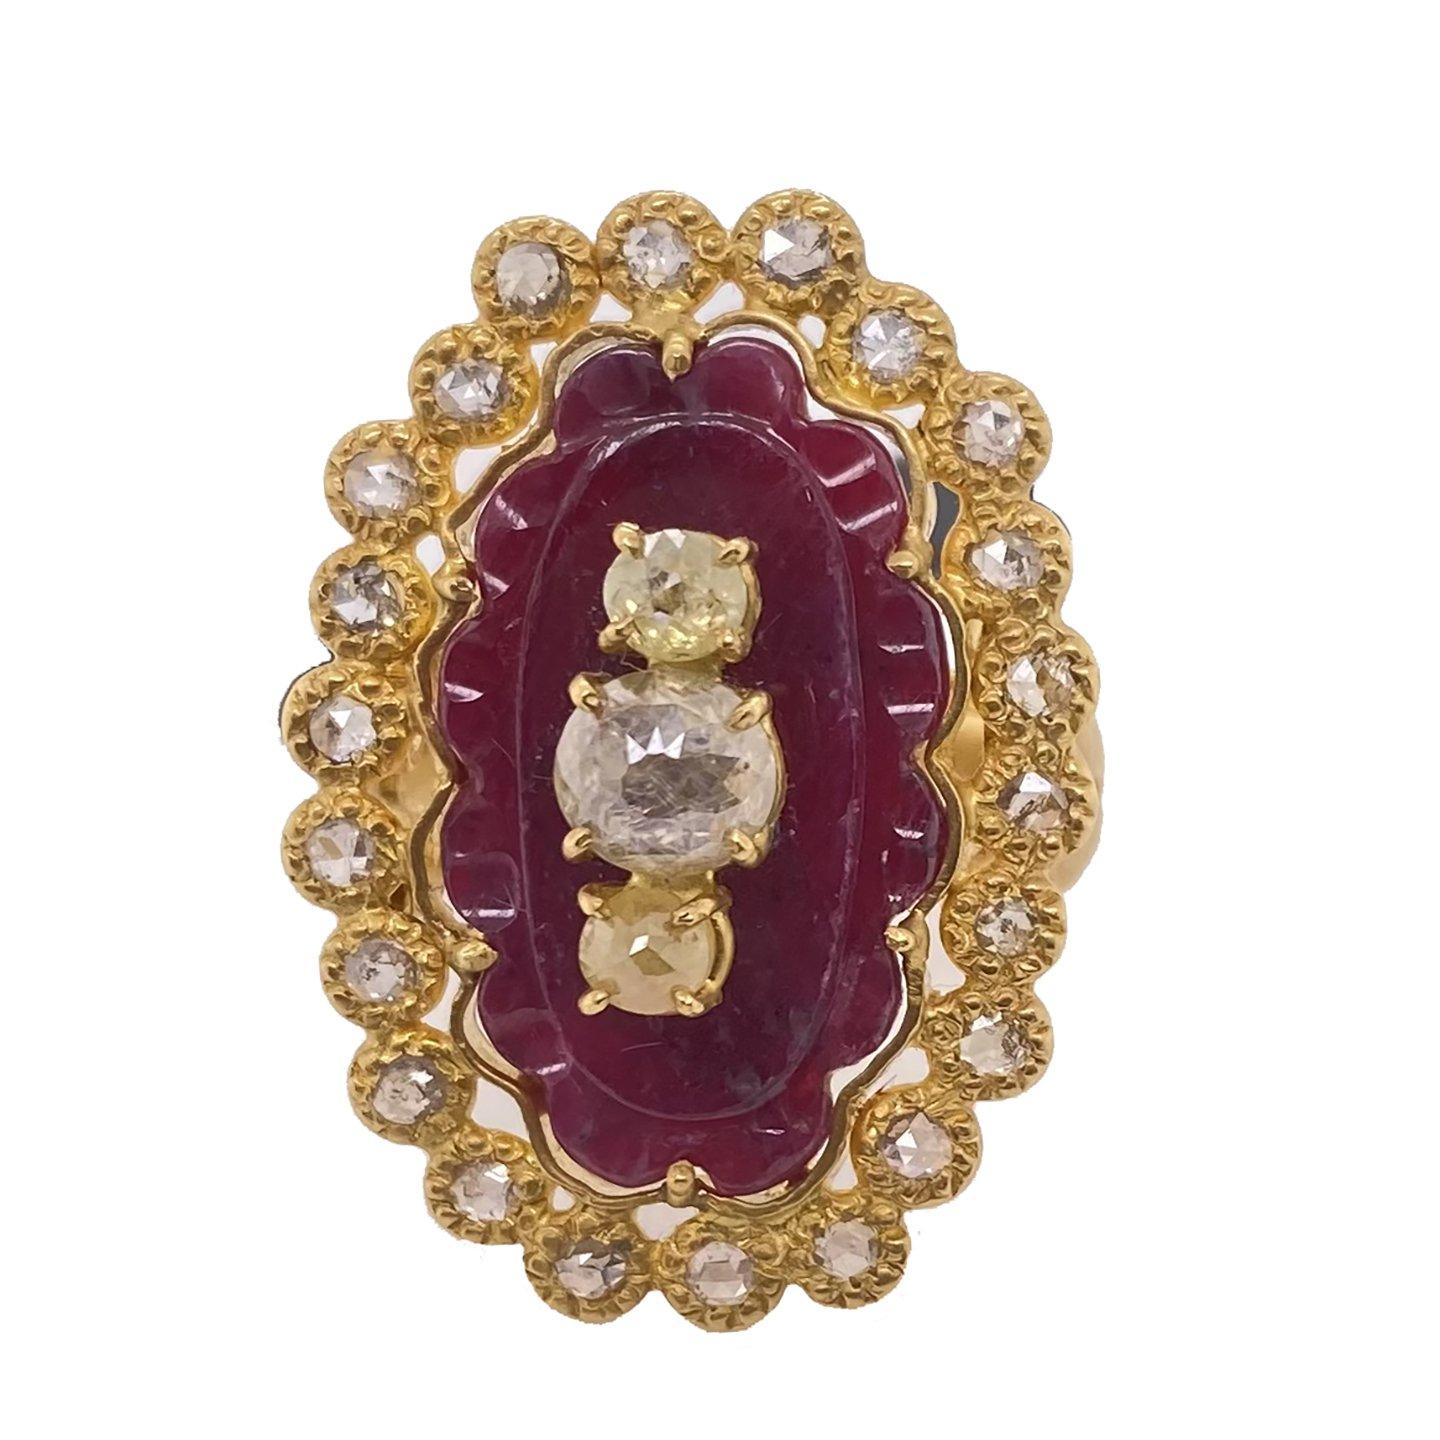 Antiquity Ruby Line Ring Set in 20 Karat Yellow Gold with 7.20-carat Carved Ruby and 0.58-carat Rose-Cut Diamonds in a Sunshine Design. This Ring has 0.80-carat of Yellow Diamonds and is part of COOMI's Antiquity Collection. The Antiquity Collection